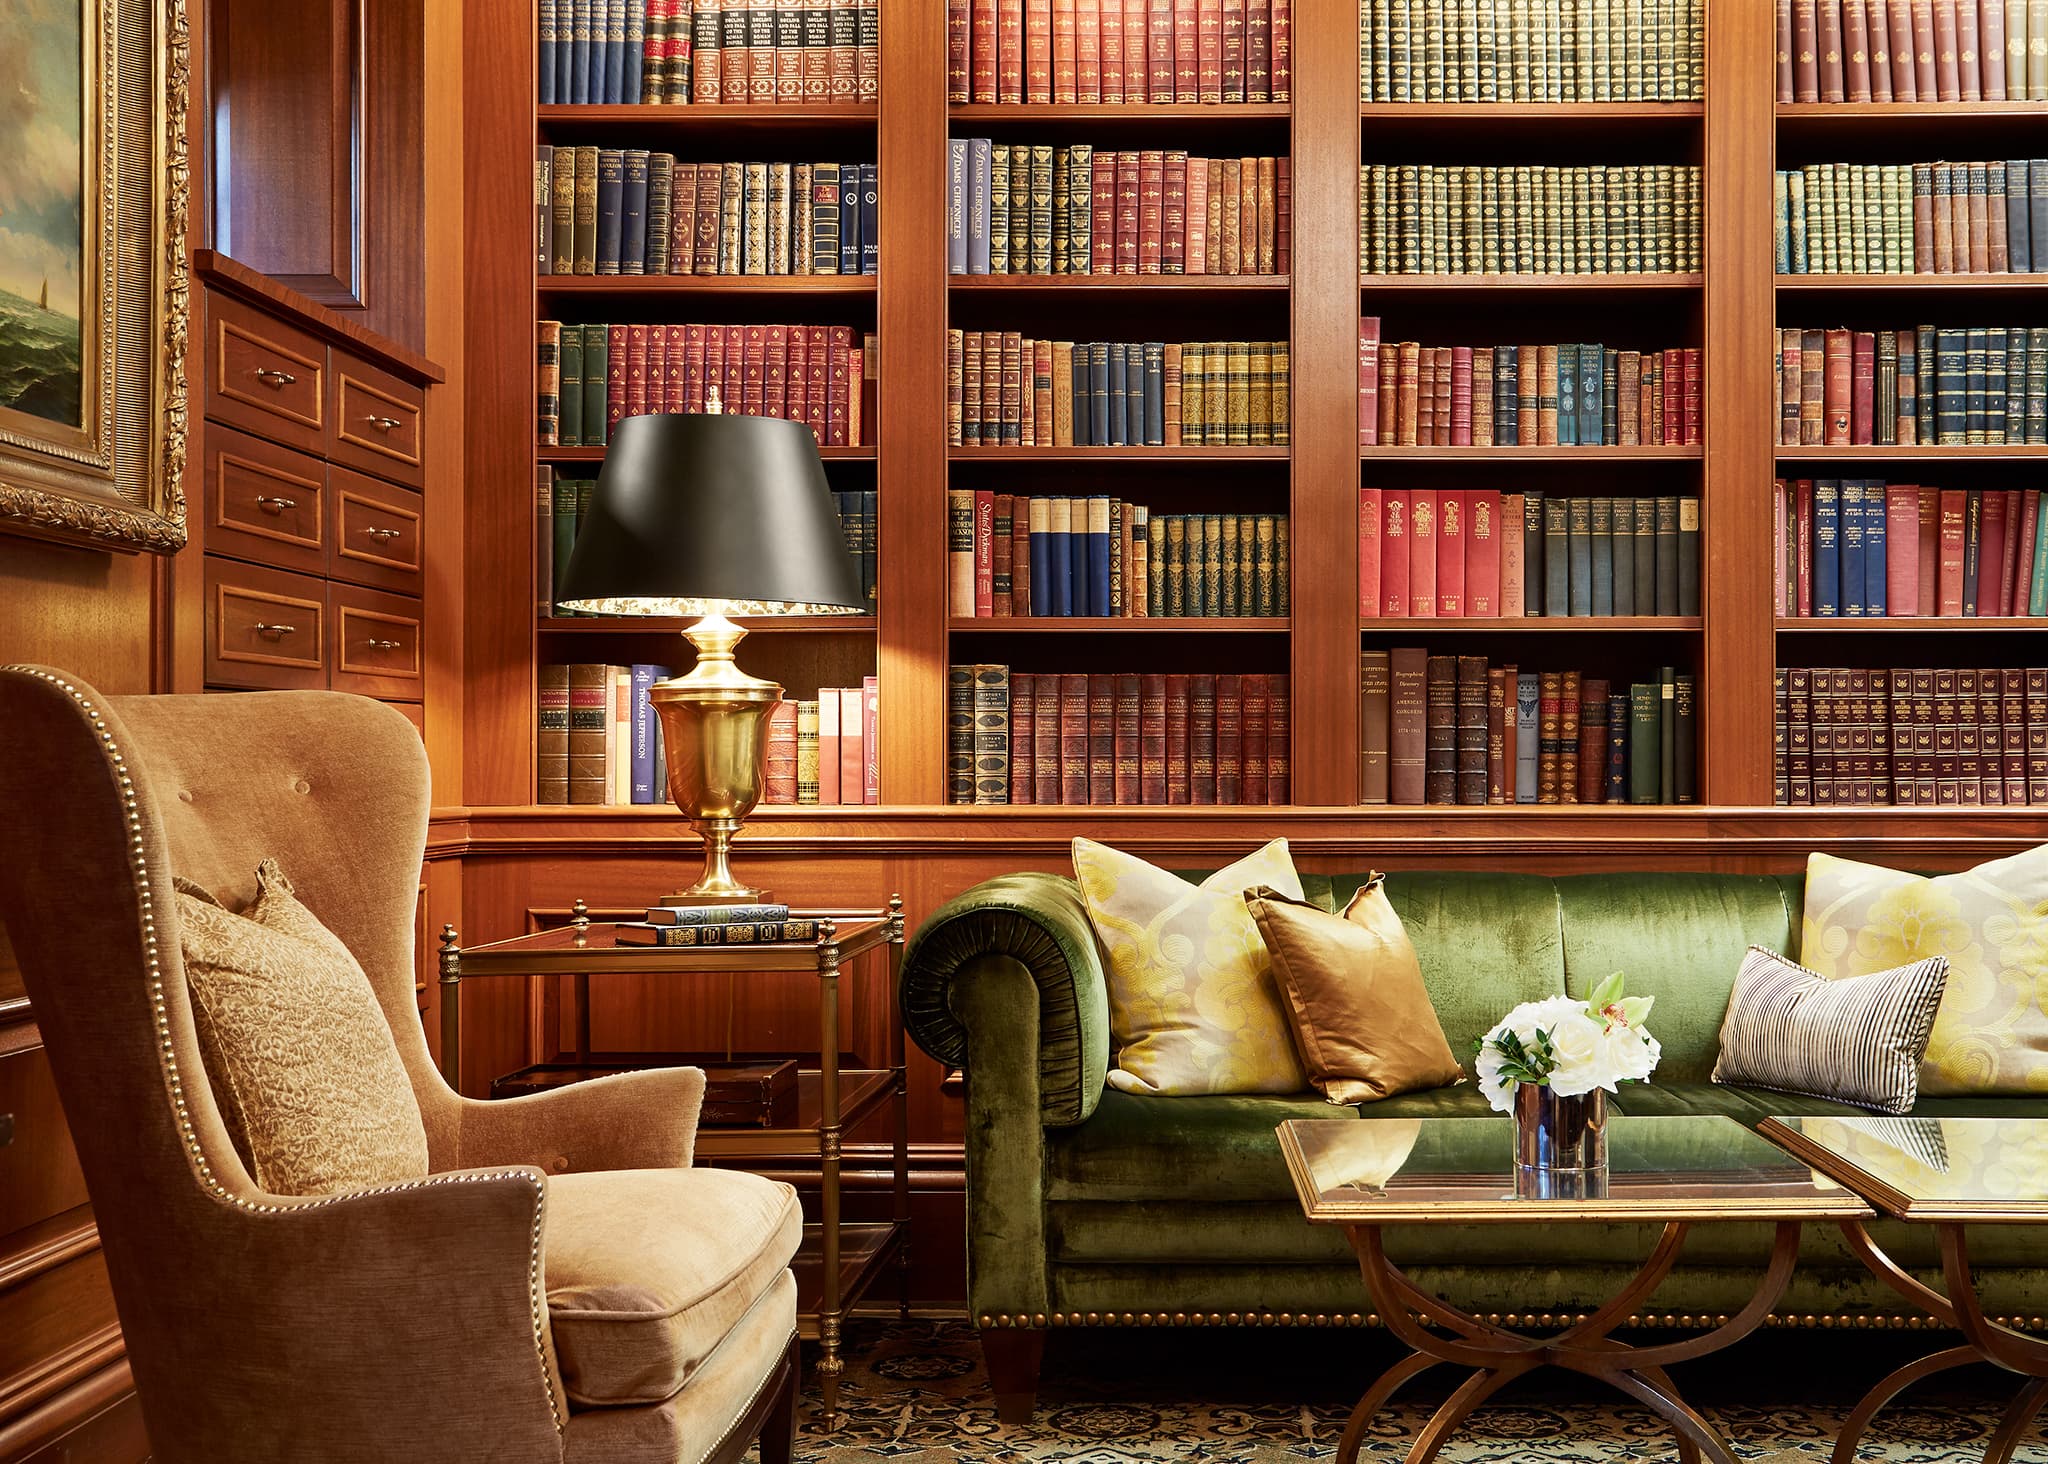 A view of a comfortable chair, sofa, and library shelves at the Jefferson DC Book Room.